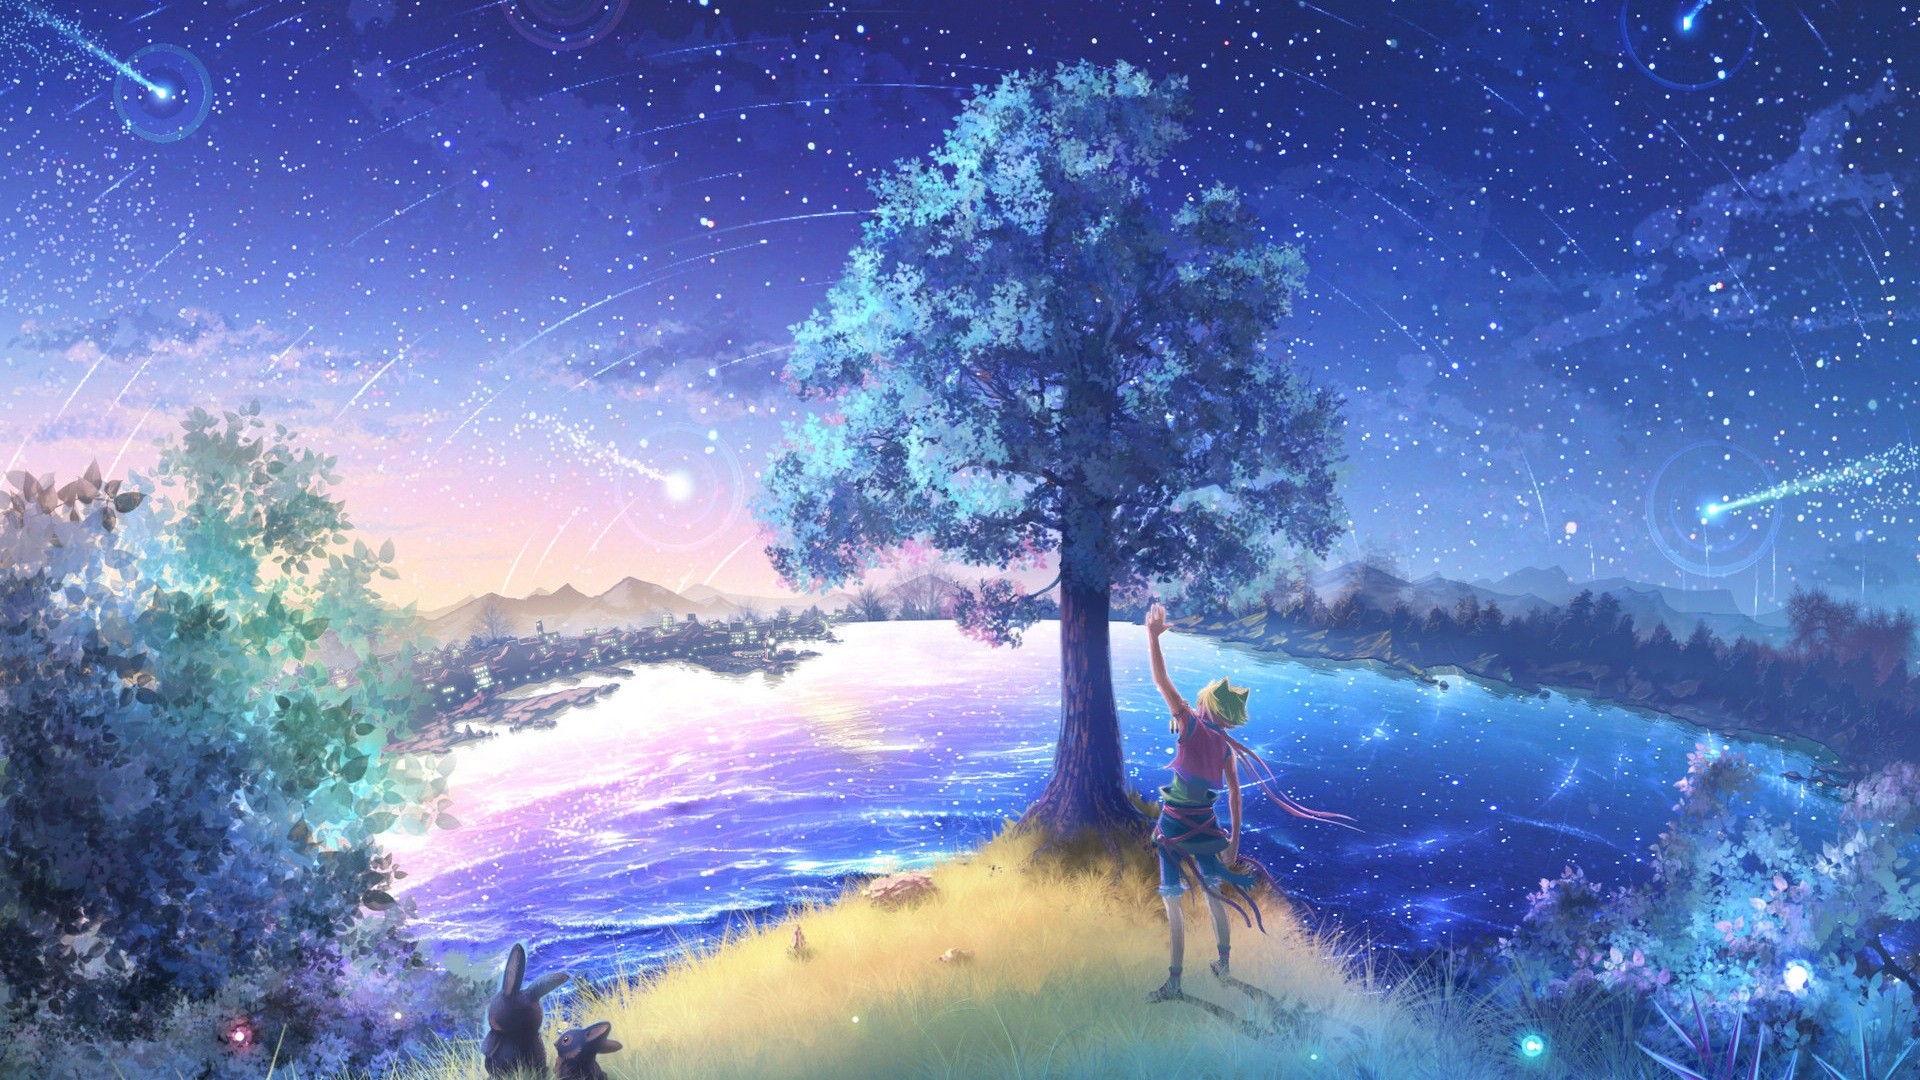 beautiful anime wallpaper,nature,sky,natural landscape,tree,painting